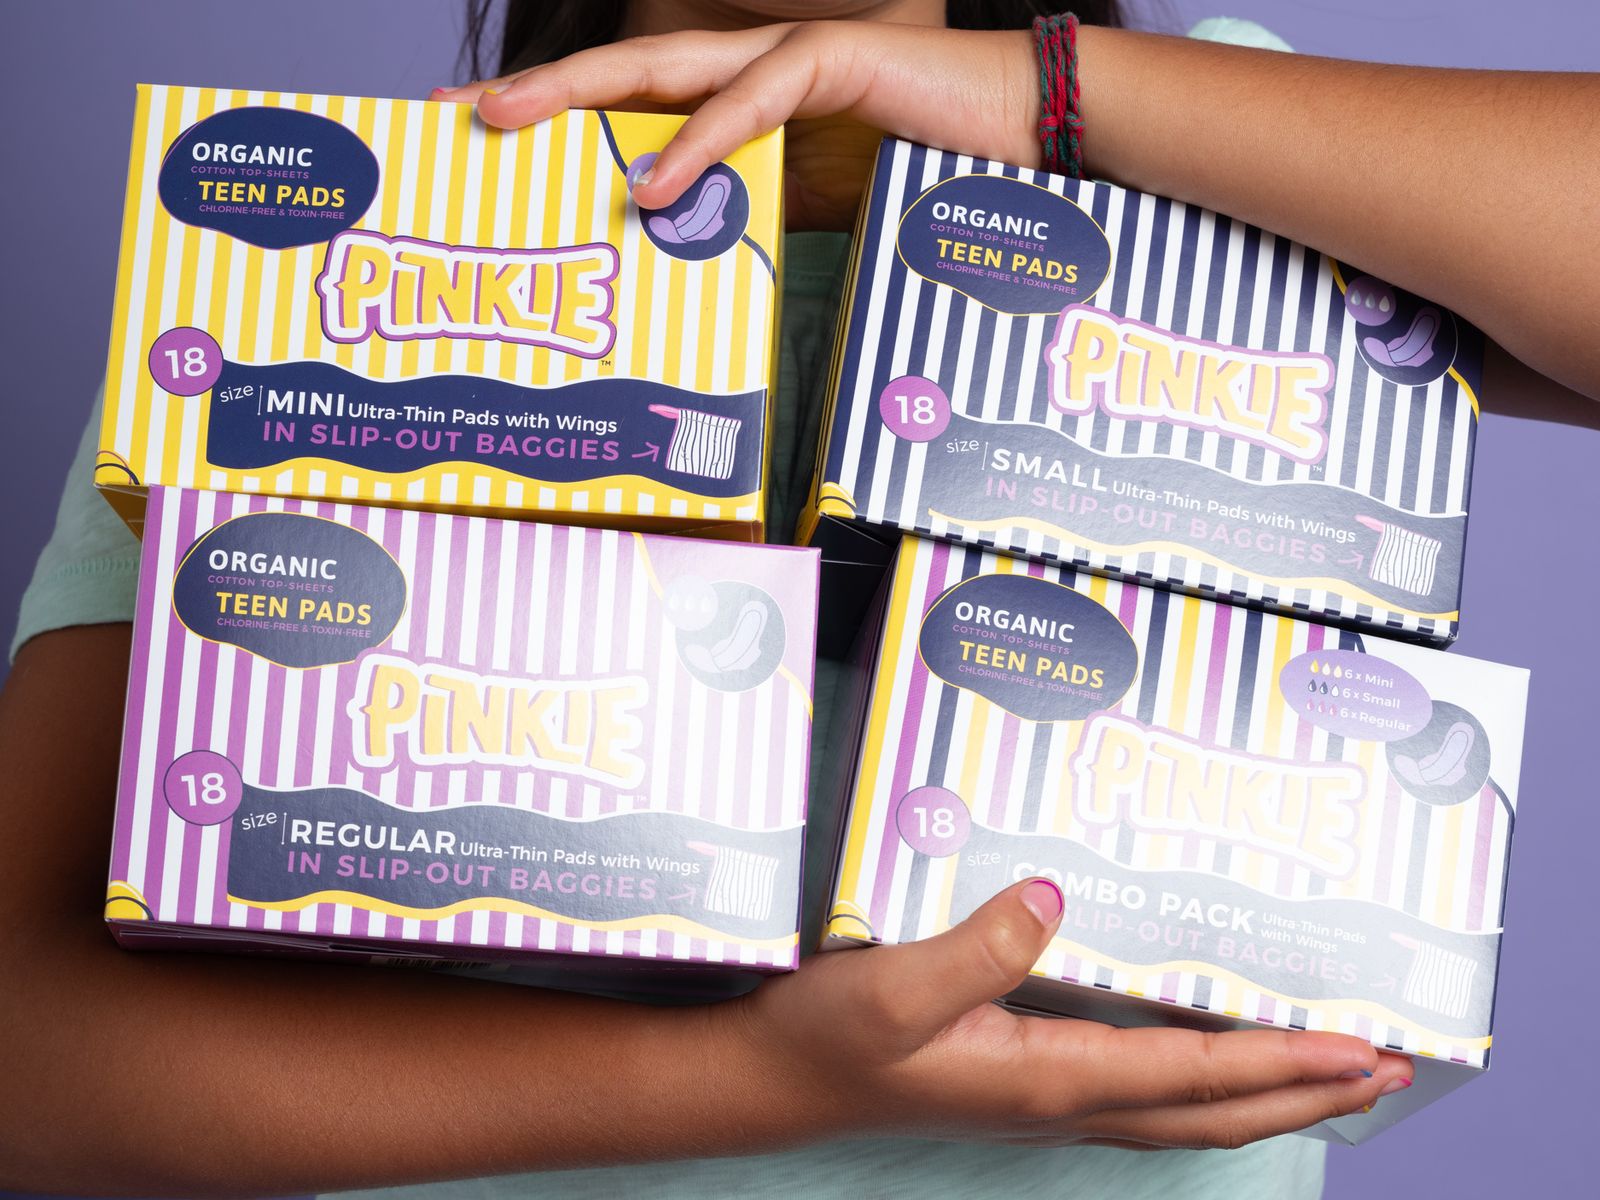 Pinkie, a maker of period pads for adolescents, raises $1M